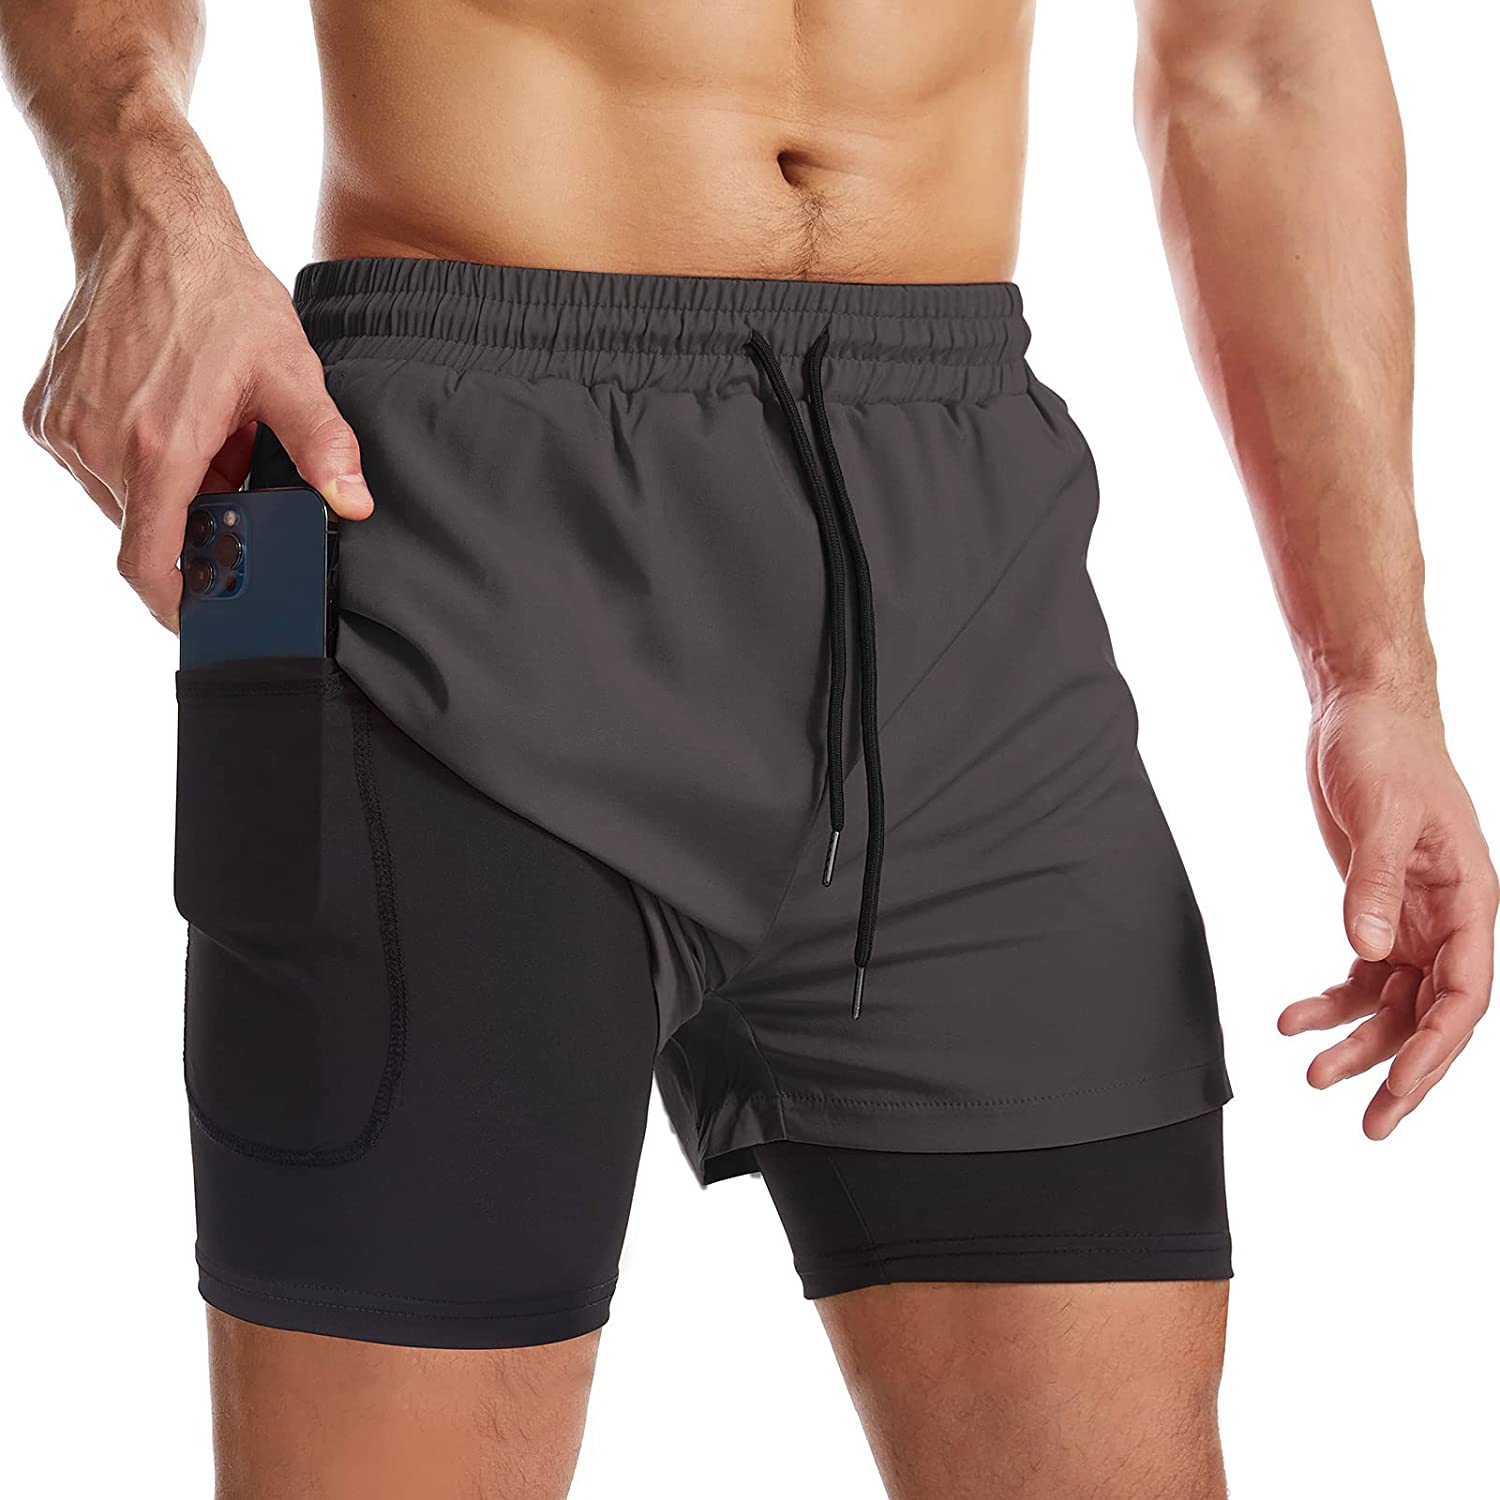 And1 Shorts WholeSale - Price List, Bulk Buy at